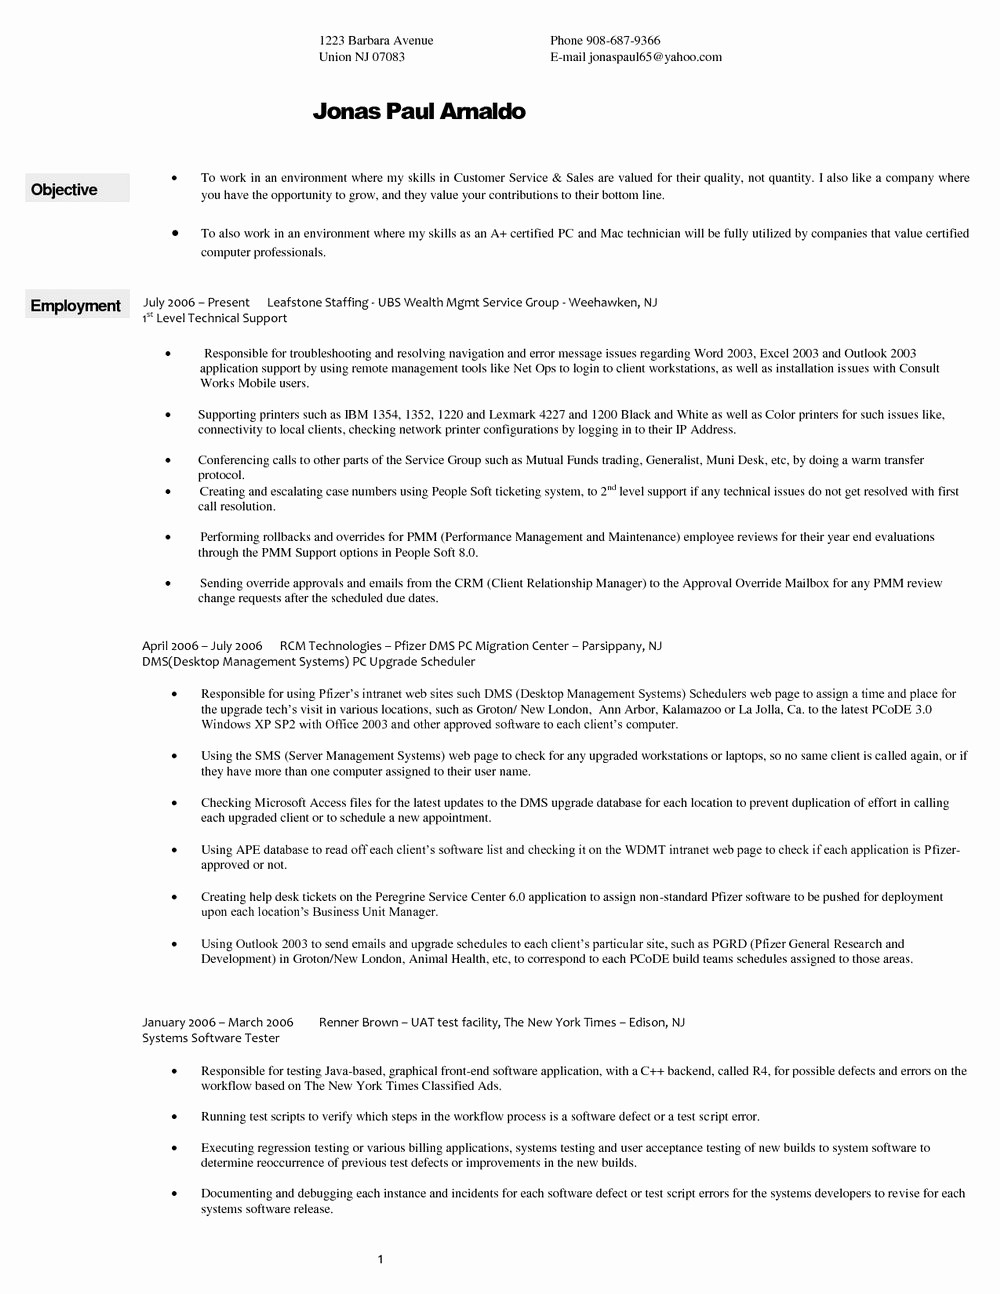 Resumes On Microsoft Word 2007 Inspirational Resume Wizard Word 2007 Resumes 1976